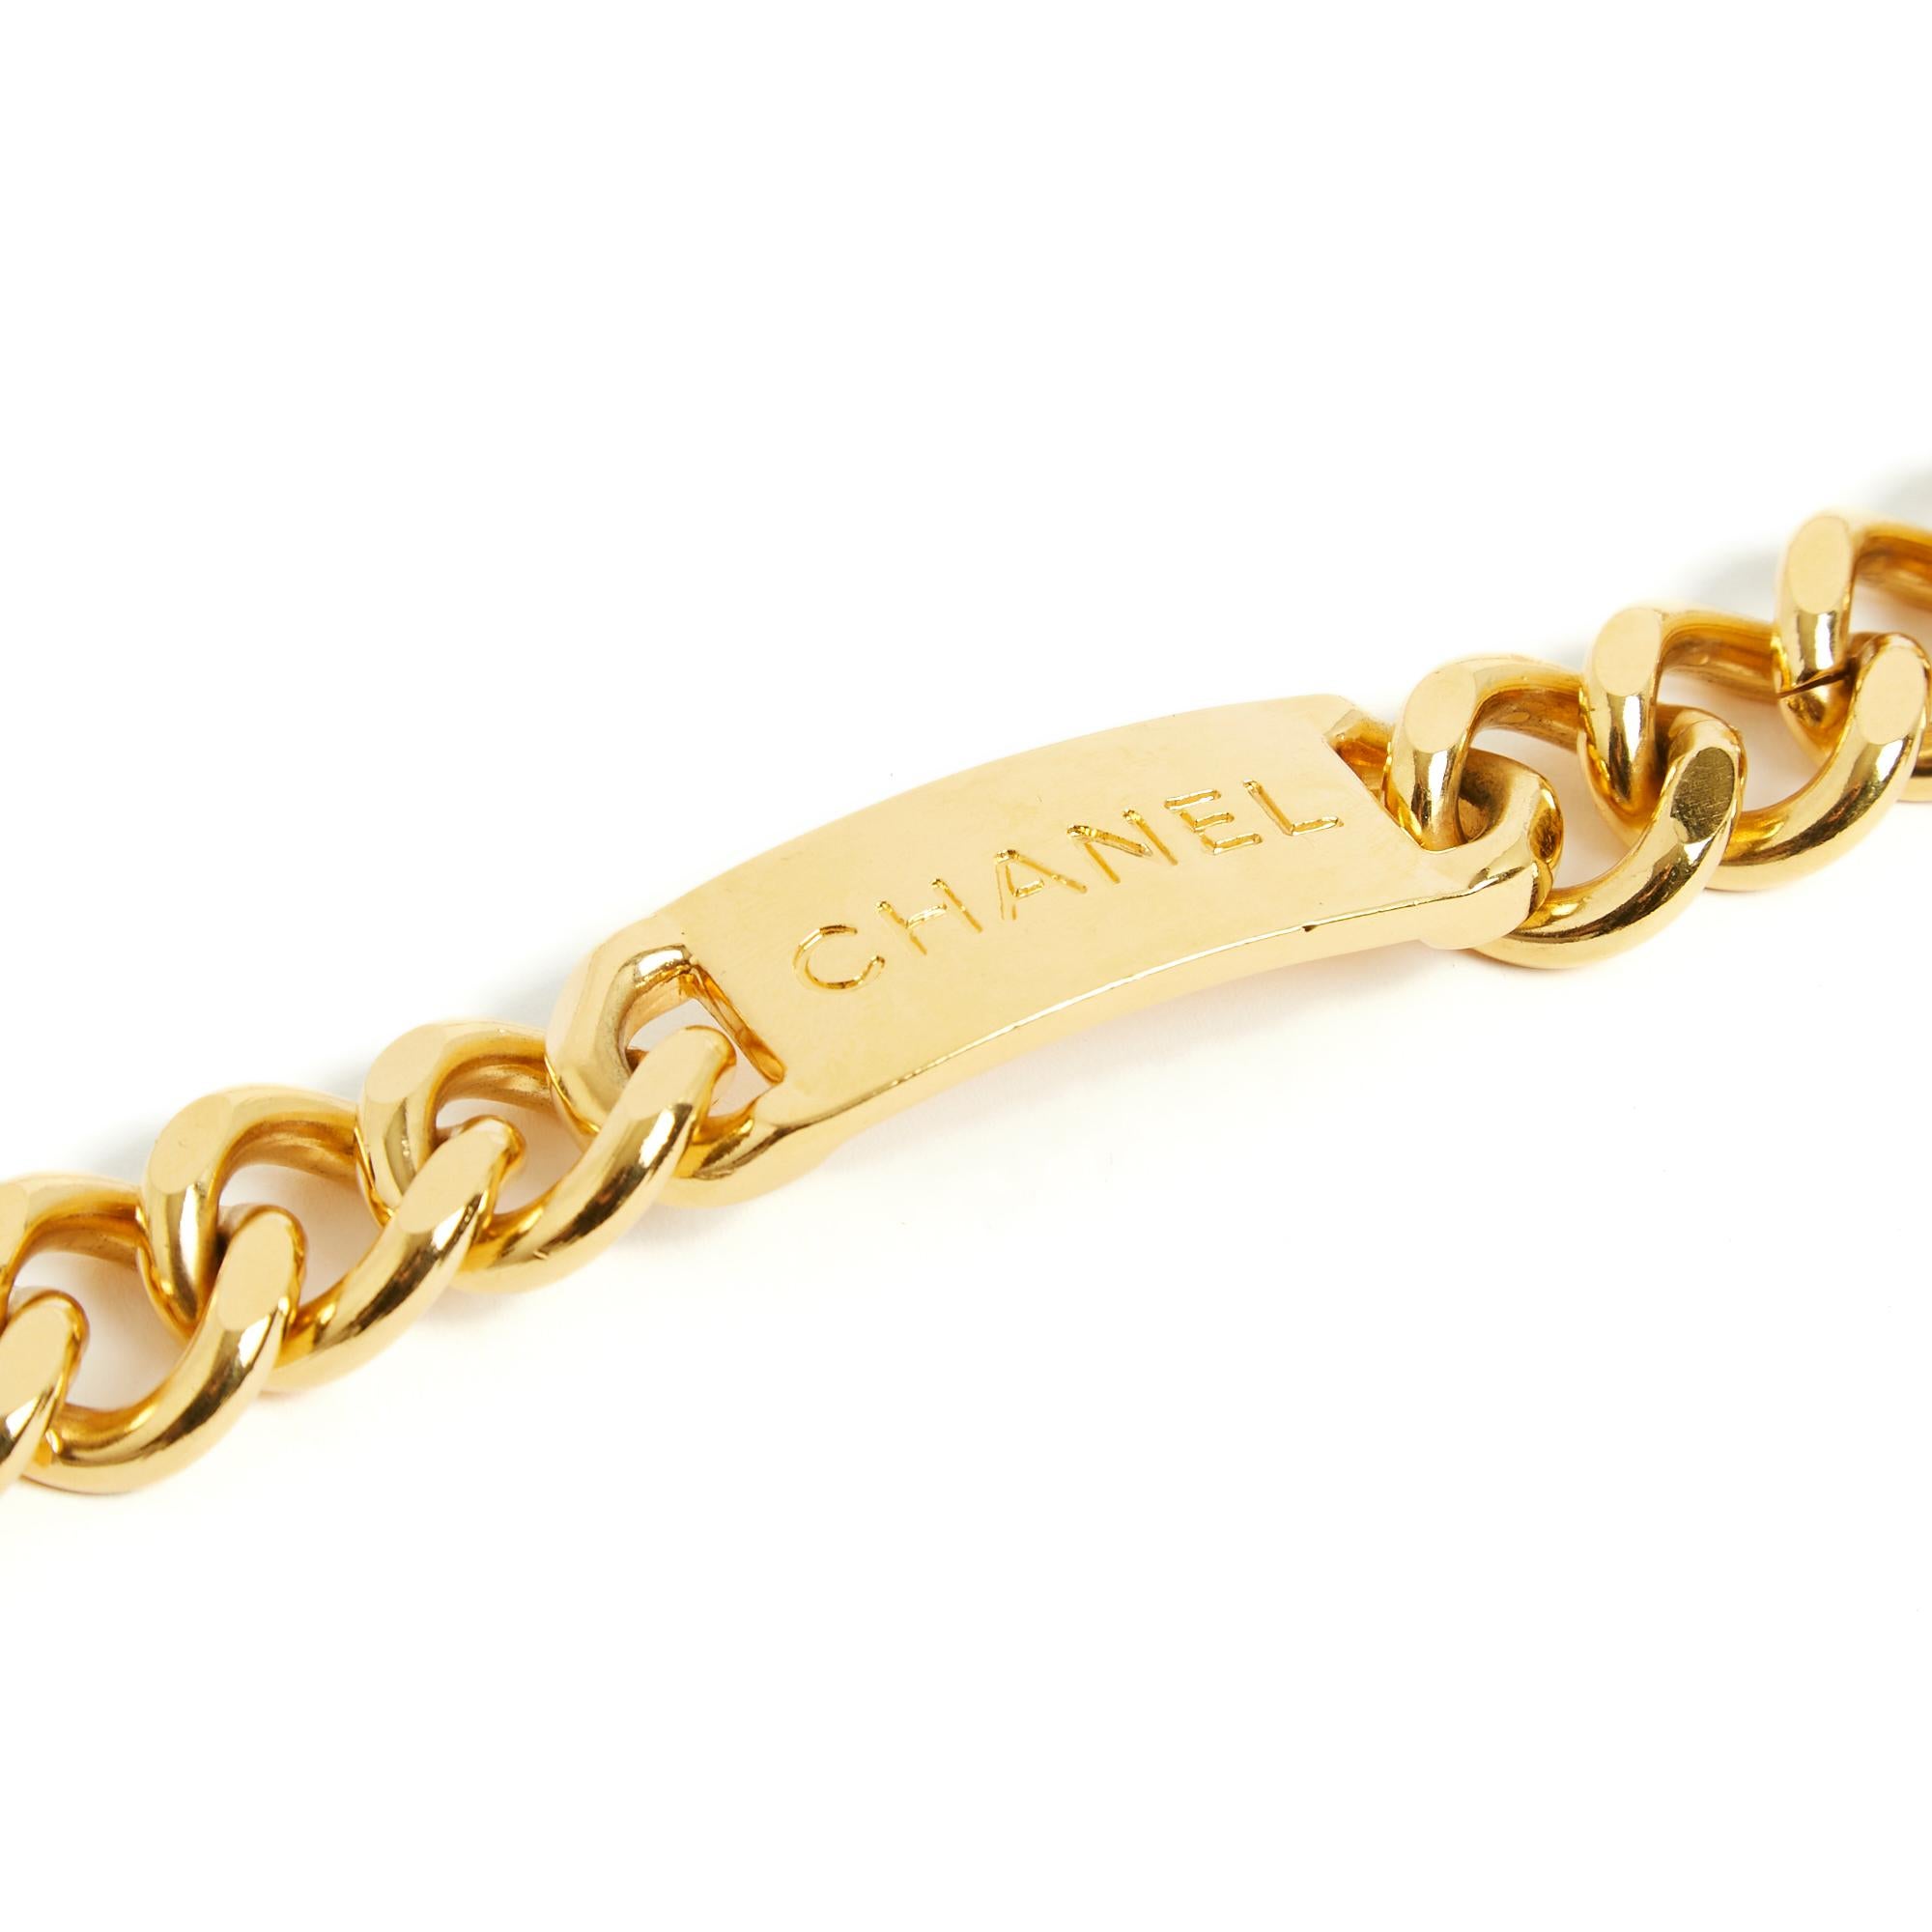 Chanel belt circa 1990 in metal composed of a wide chain interspersed with a Chanel logo plate and extended by a CC logo medallion on each side (identical), signed hook closure. Total length of the belt 93 cm, length of the chain 89 cm, diameter of